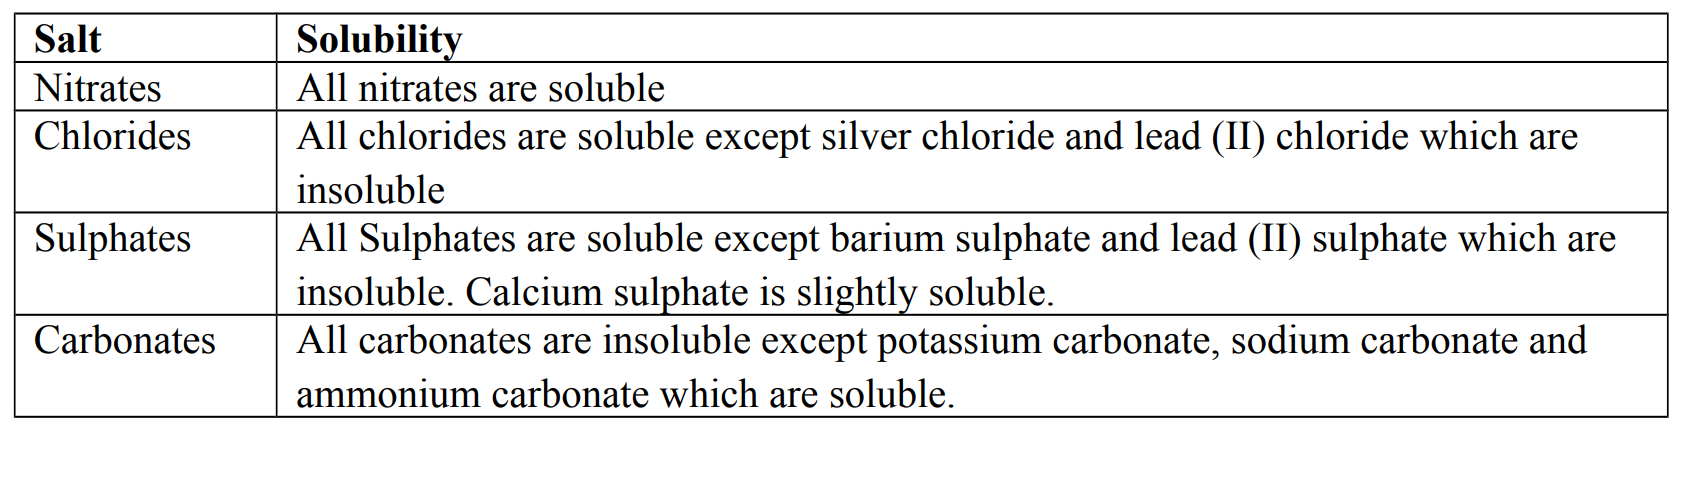  Facts about solubility of salts